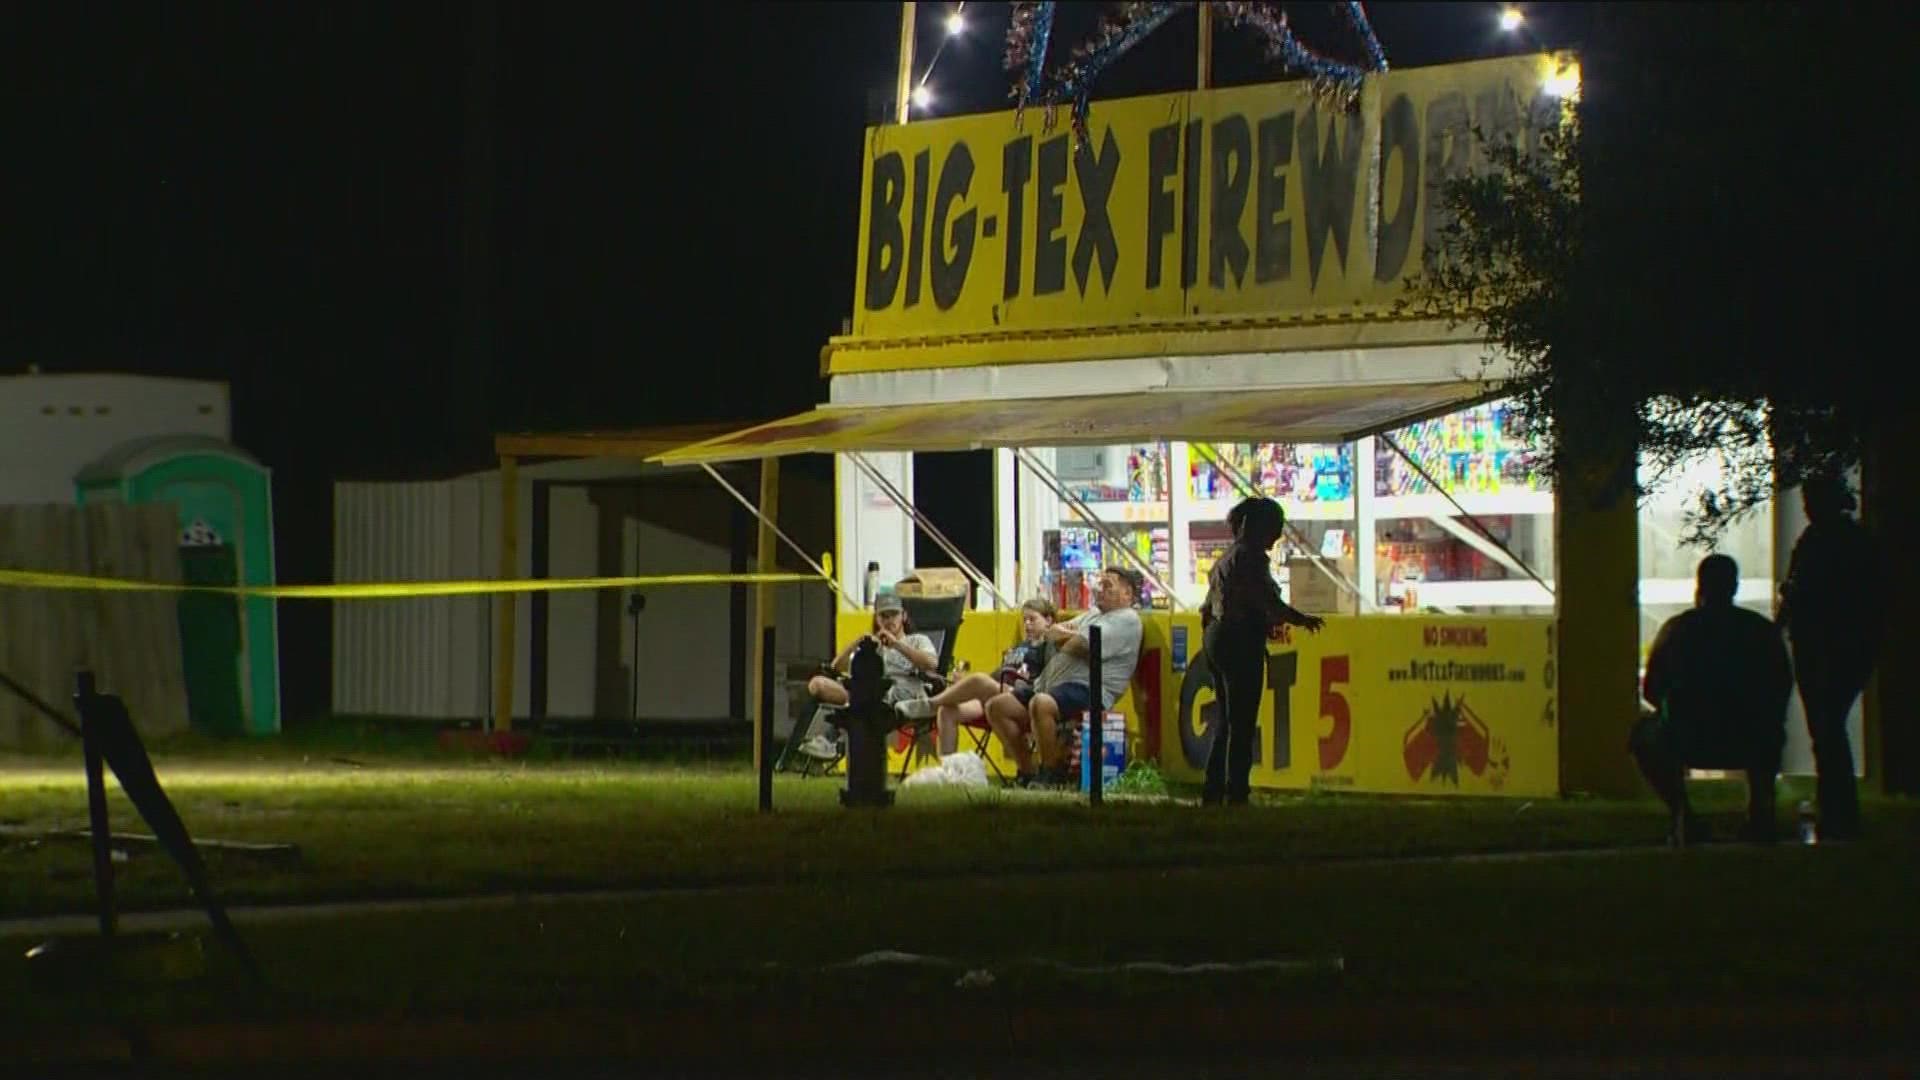 The Travis County Sheriff's Office is investigating an aggravated robbery incident at Big Tex Fireworks in North Austin.